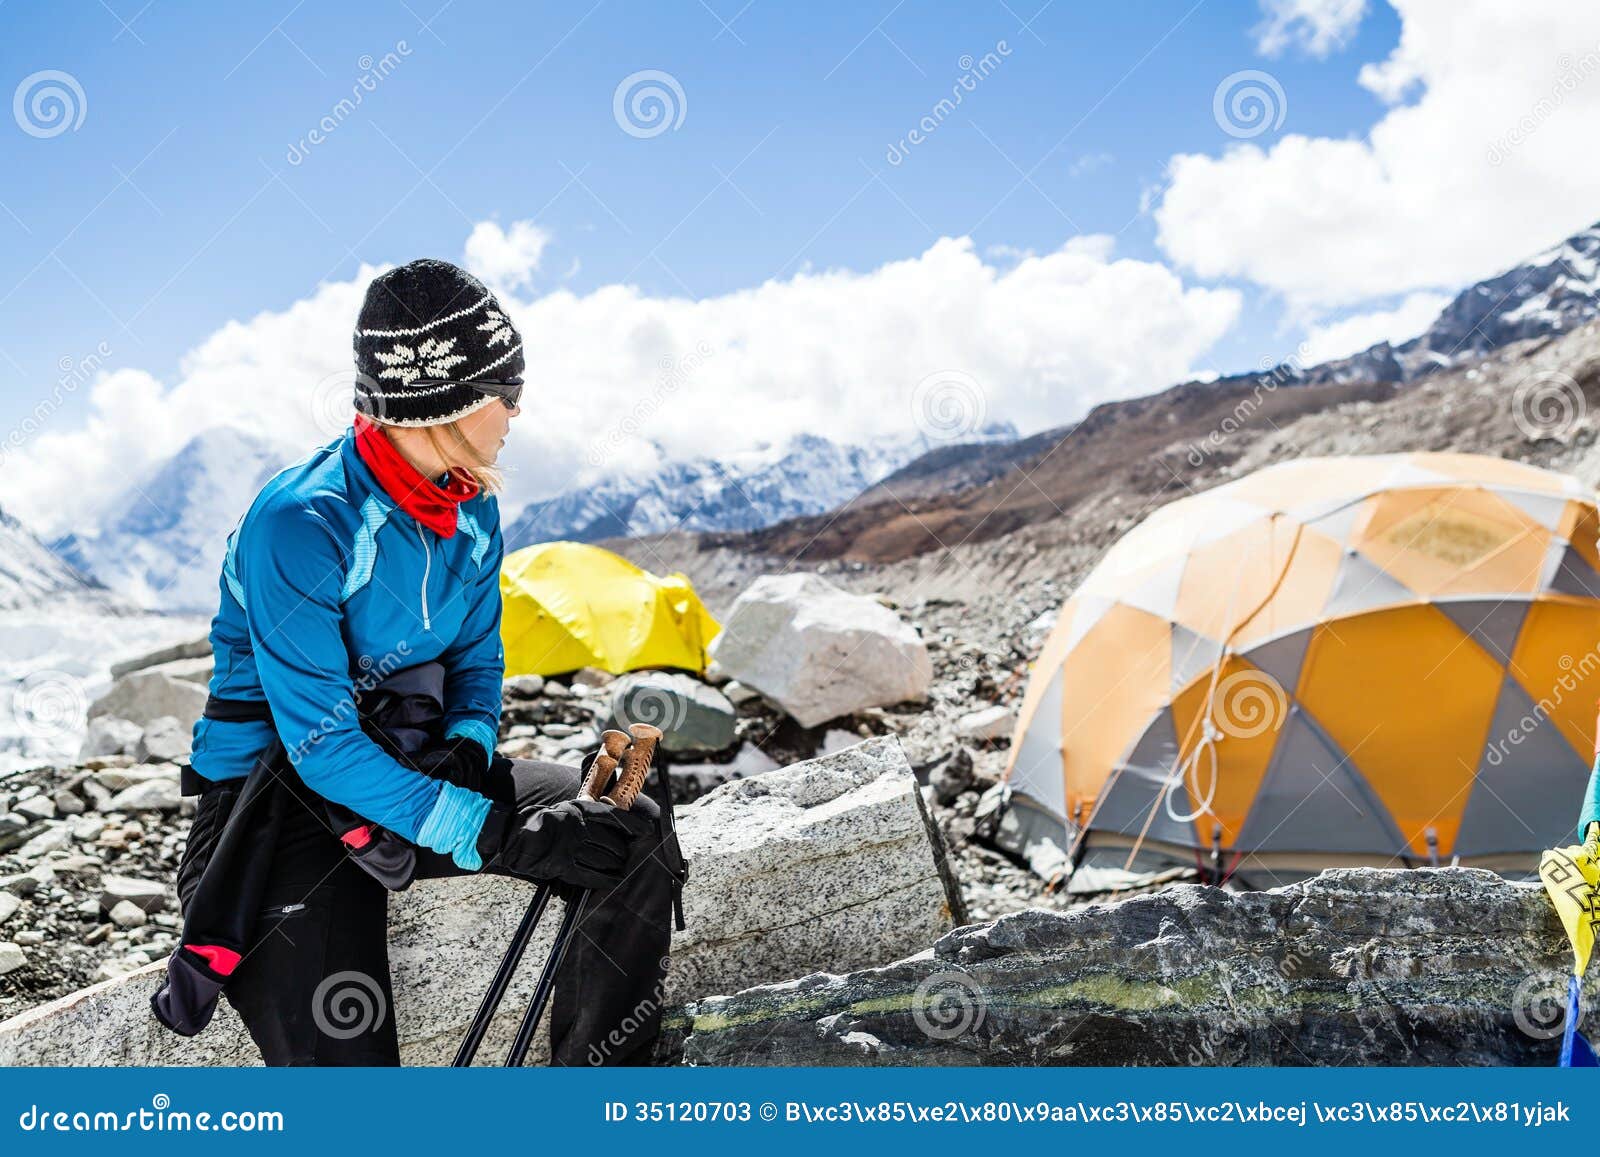 woman hiker in everest base camp